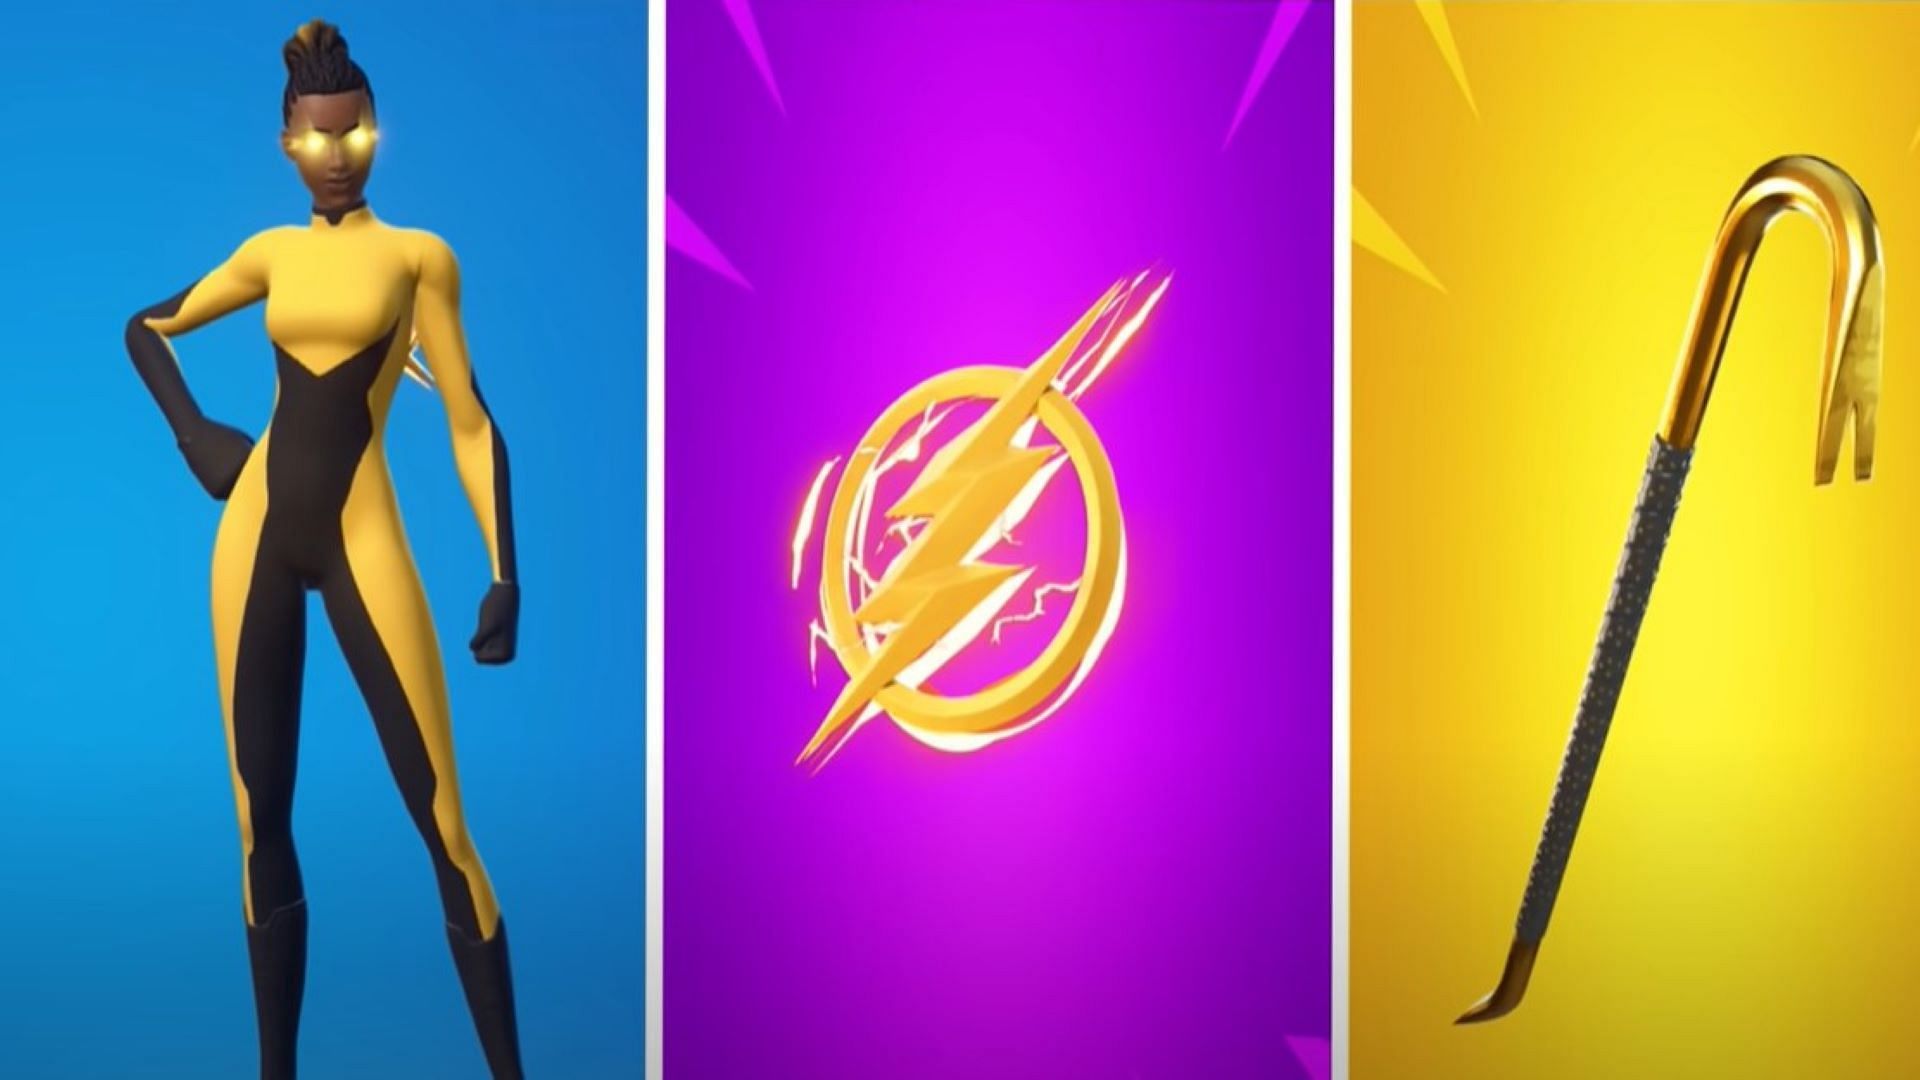 Black and Yellow Superhero skin + Speed Force back bling + Gold Crow combo in the game (Image via Kyro/YouTube)